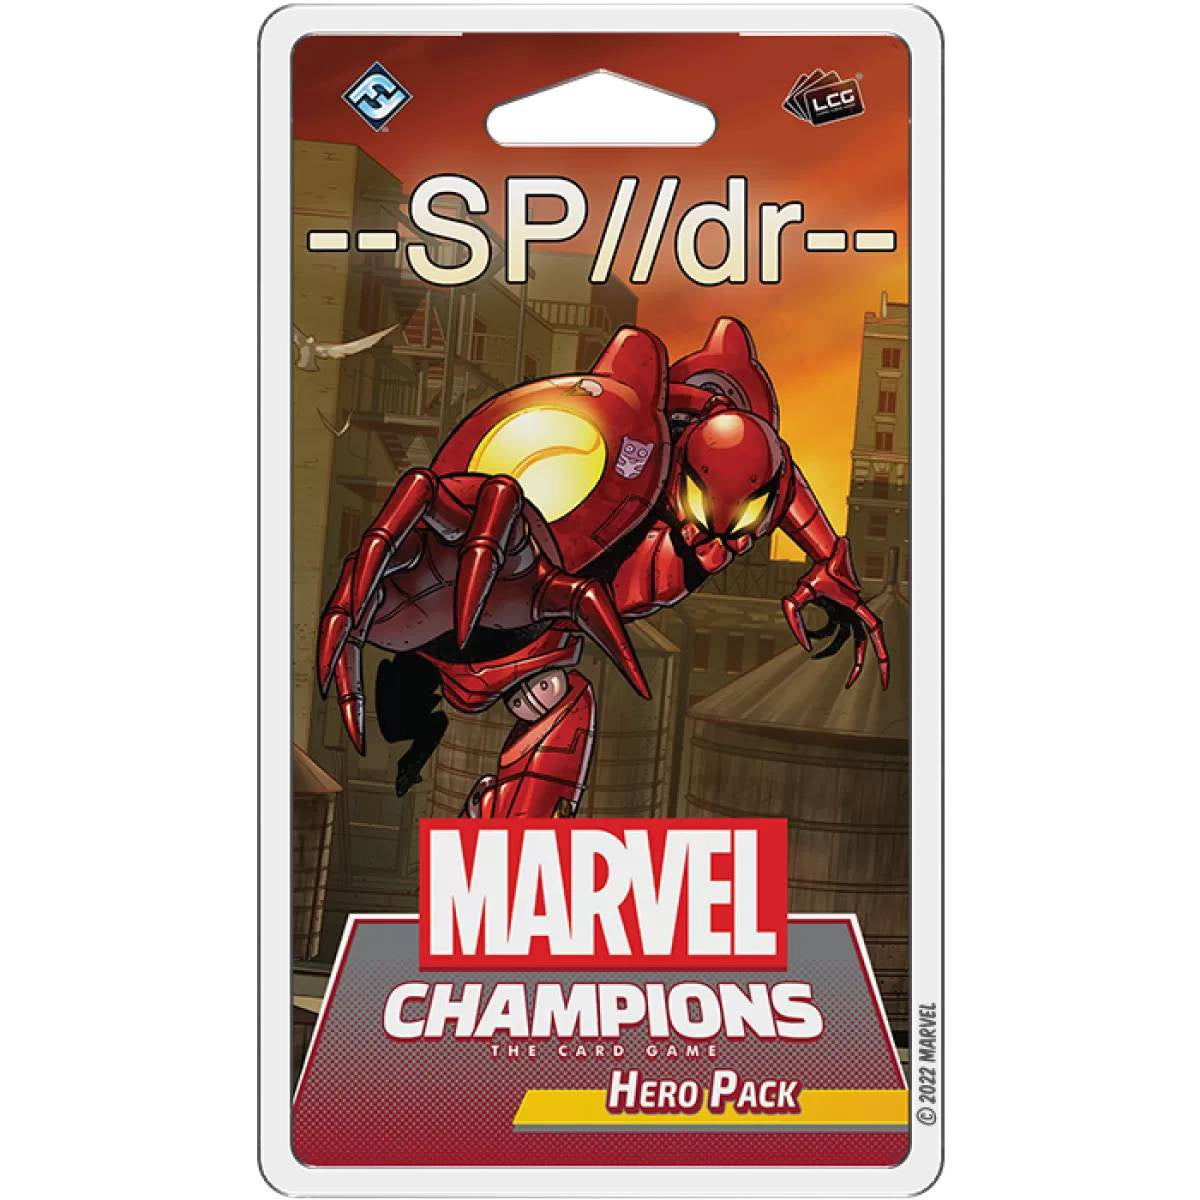 Marvel Champions The Card Game - SP//dr Hero Pack